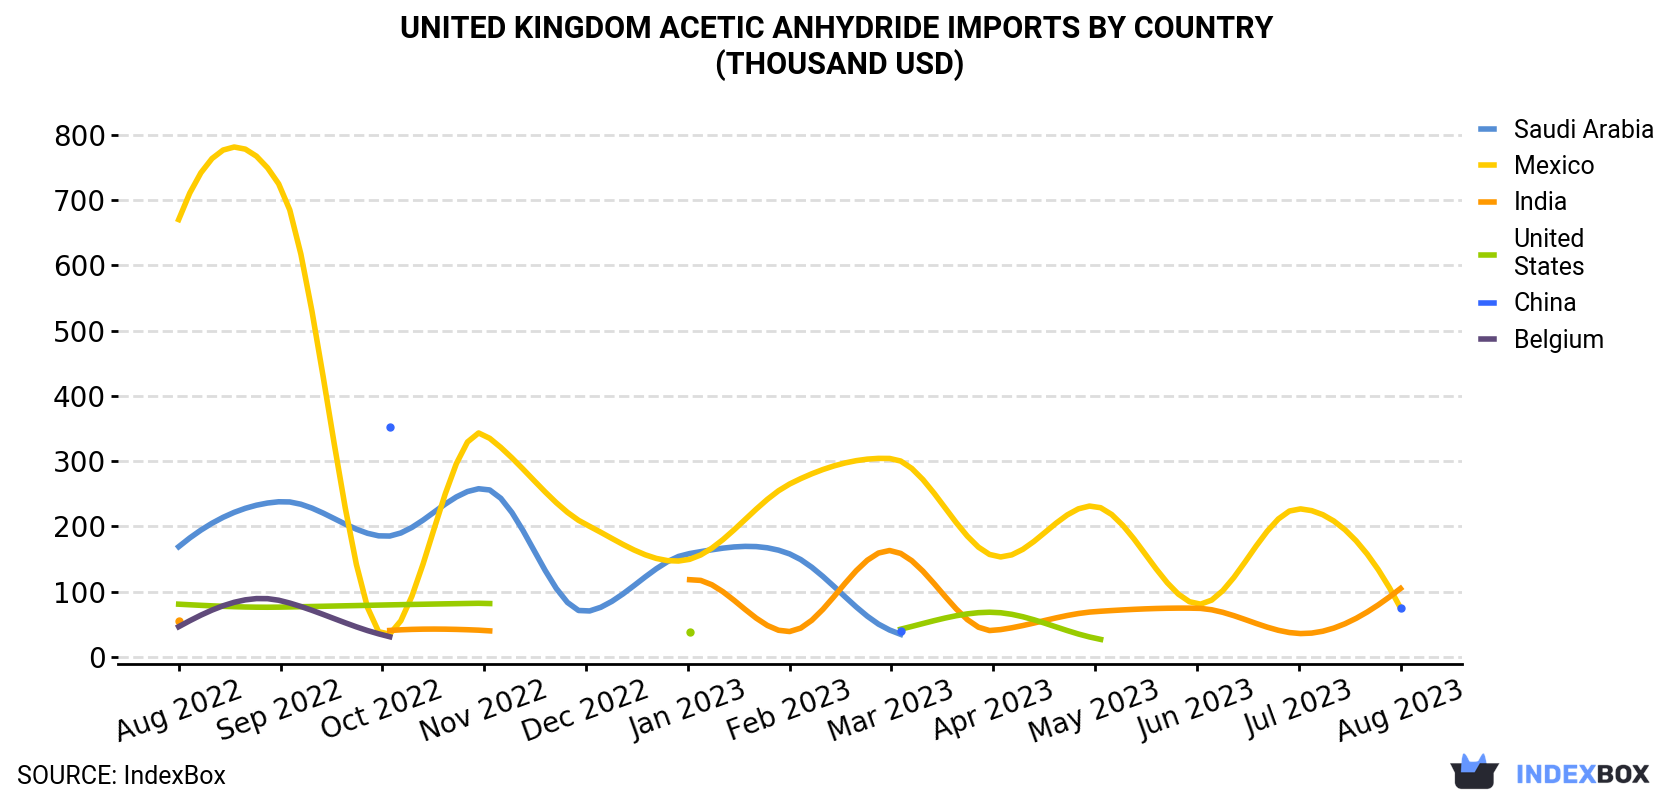 United Kingdom Acetic Anhydride Imports By Country (Thousand USD)